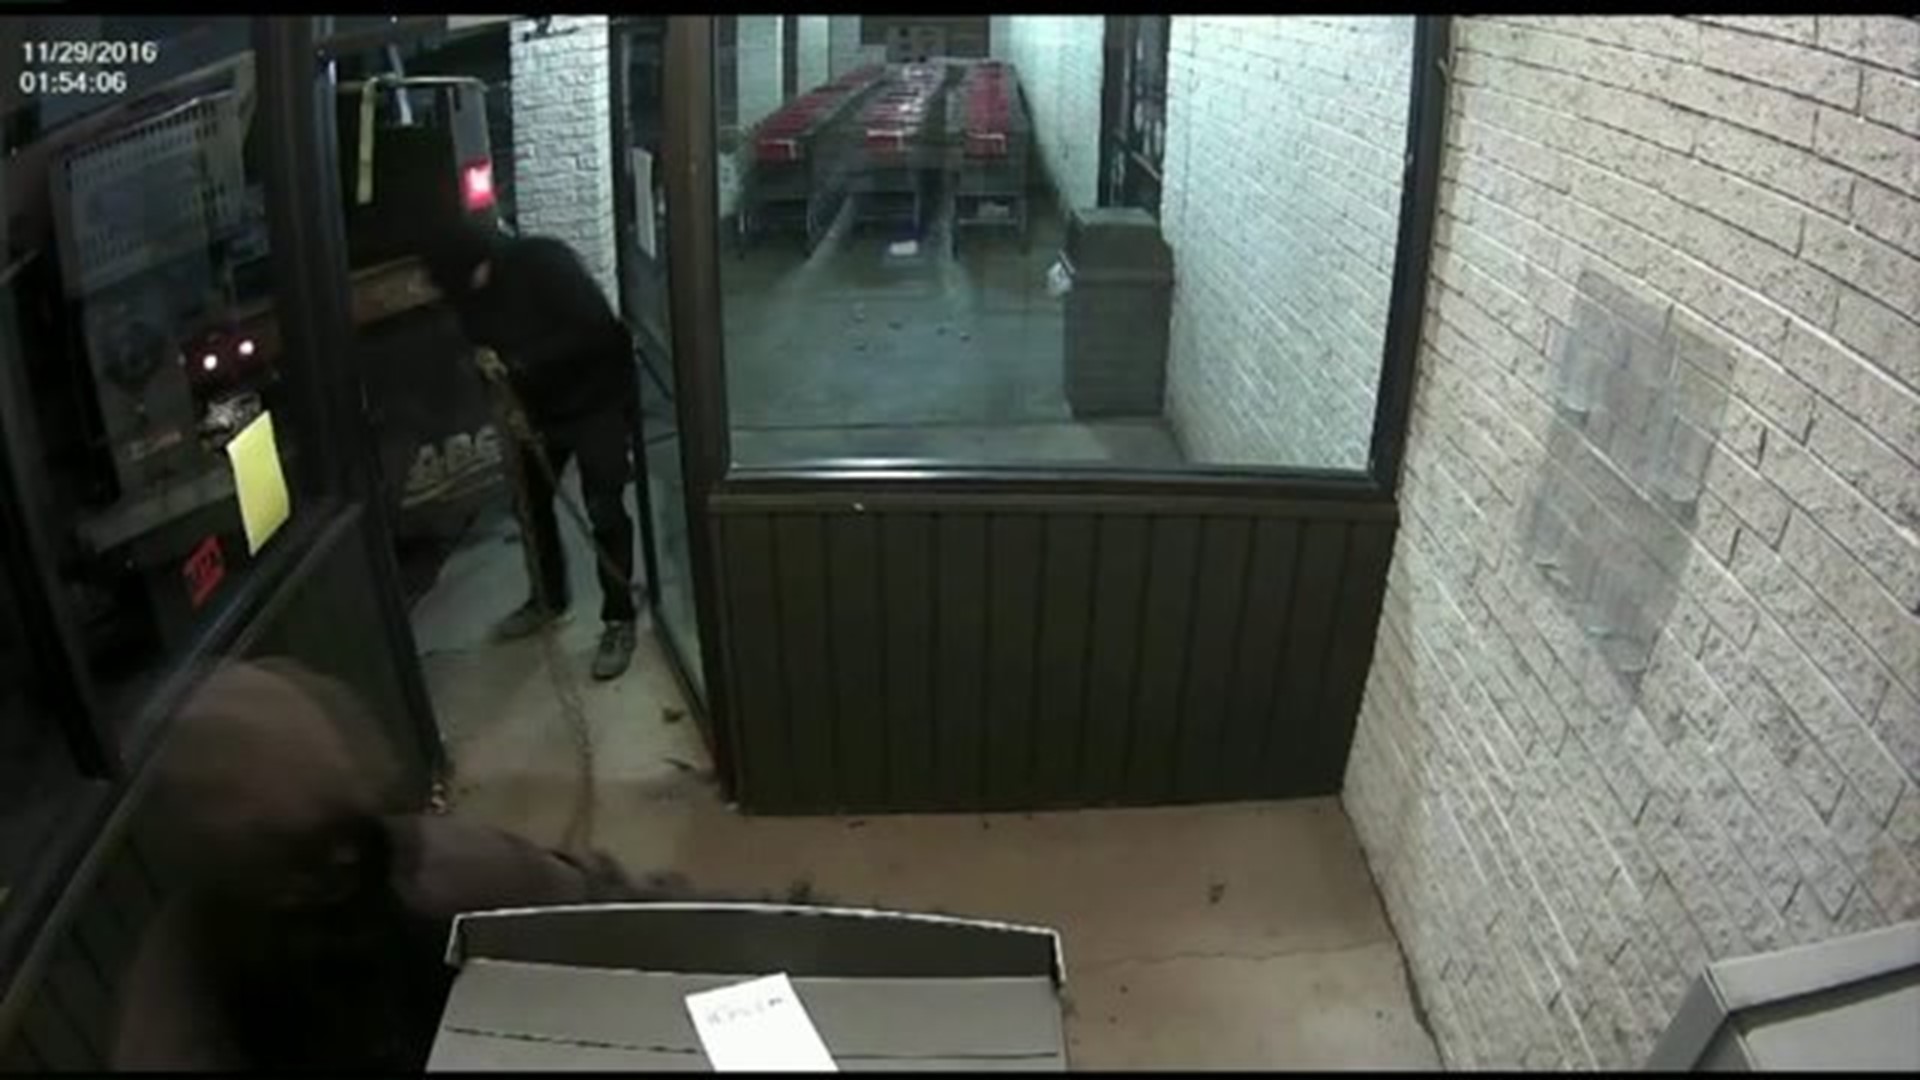 VIDEO: Thieves Steal ATM in Lackawanna County